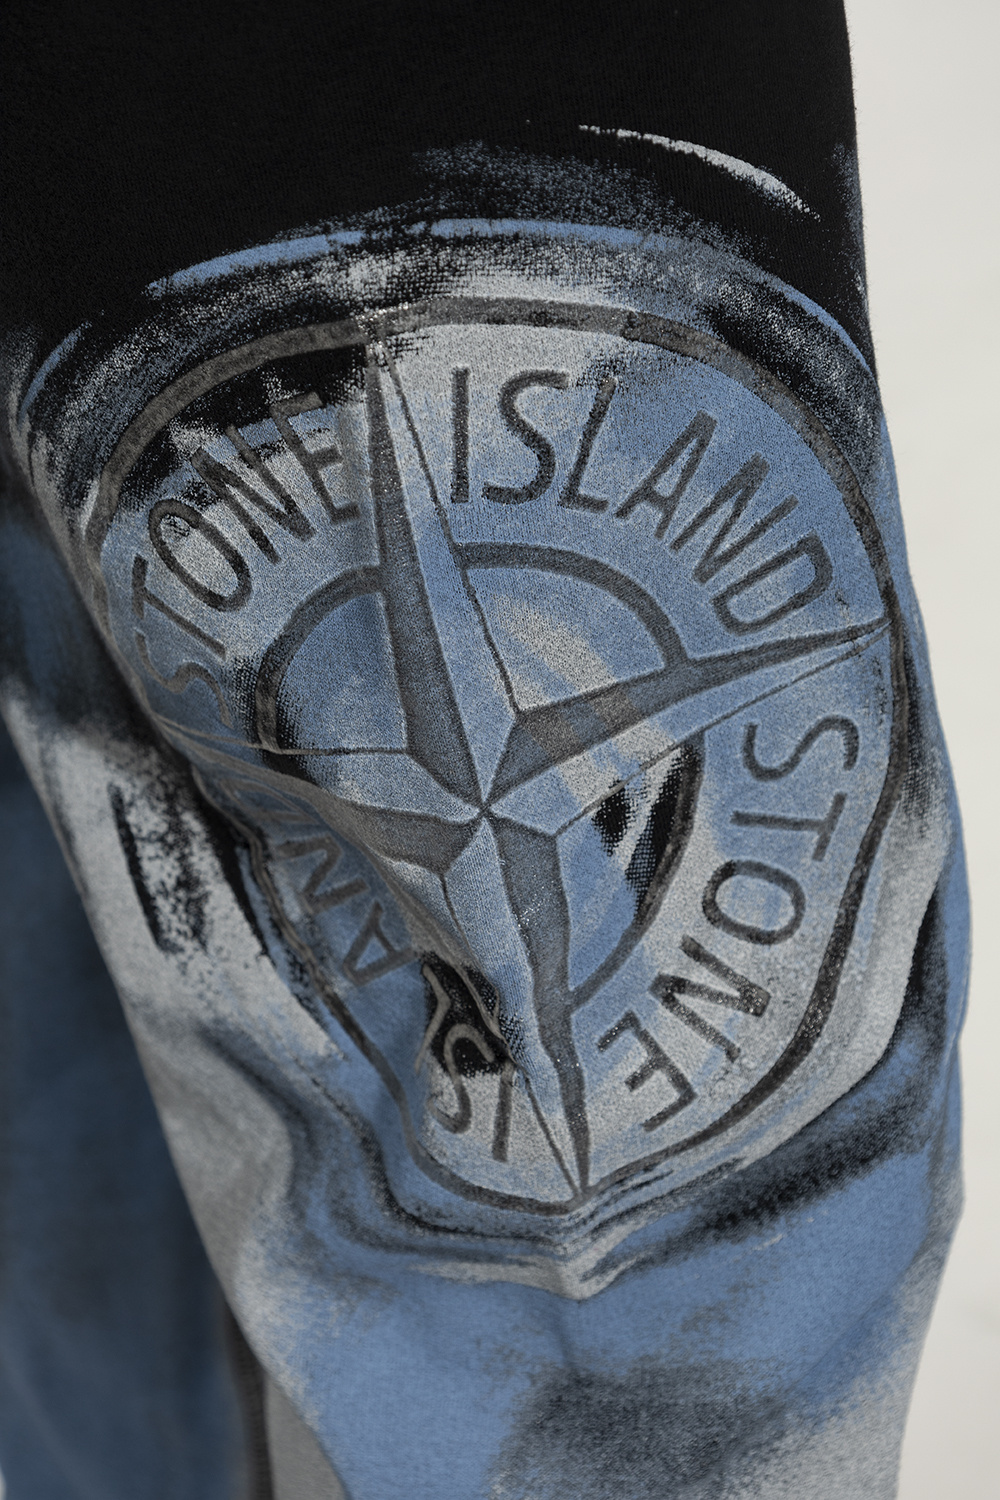 Stone Island Curvy Toothpick Jeans in Dryden Wash